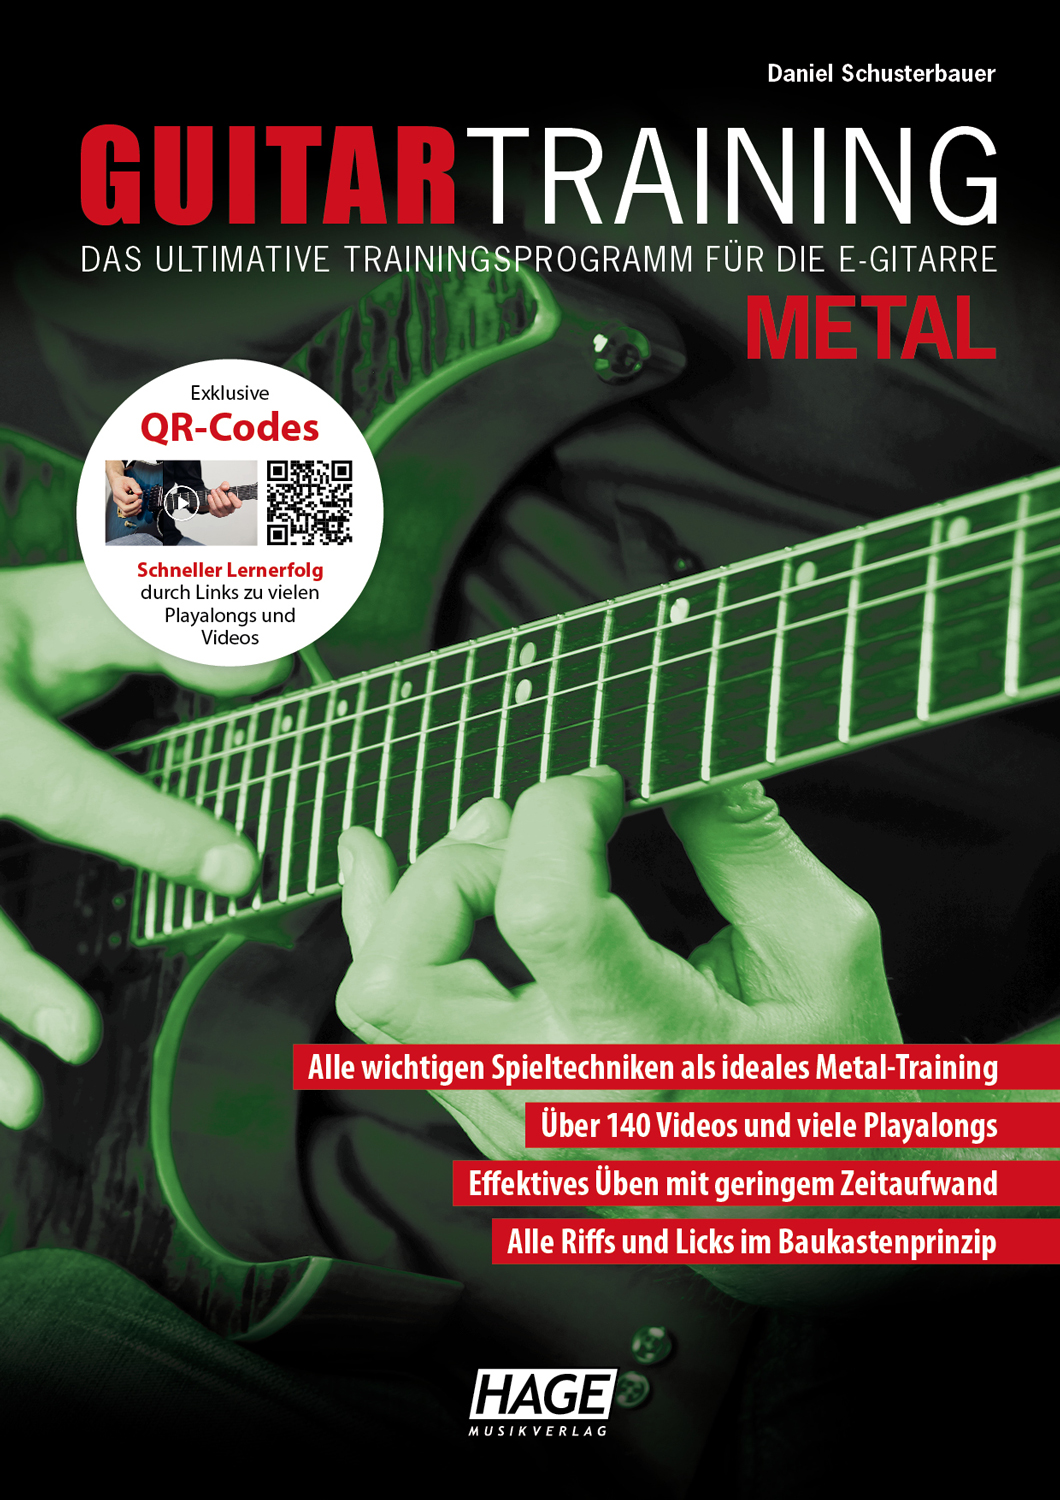 Guitar Training Metal (with QR Codes)